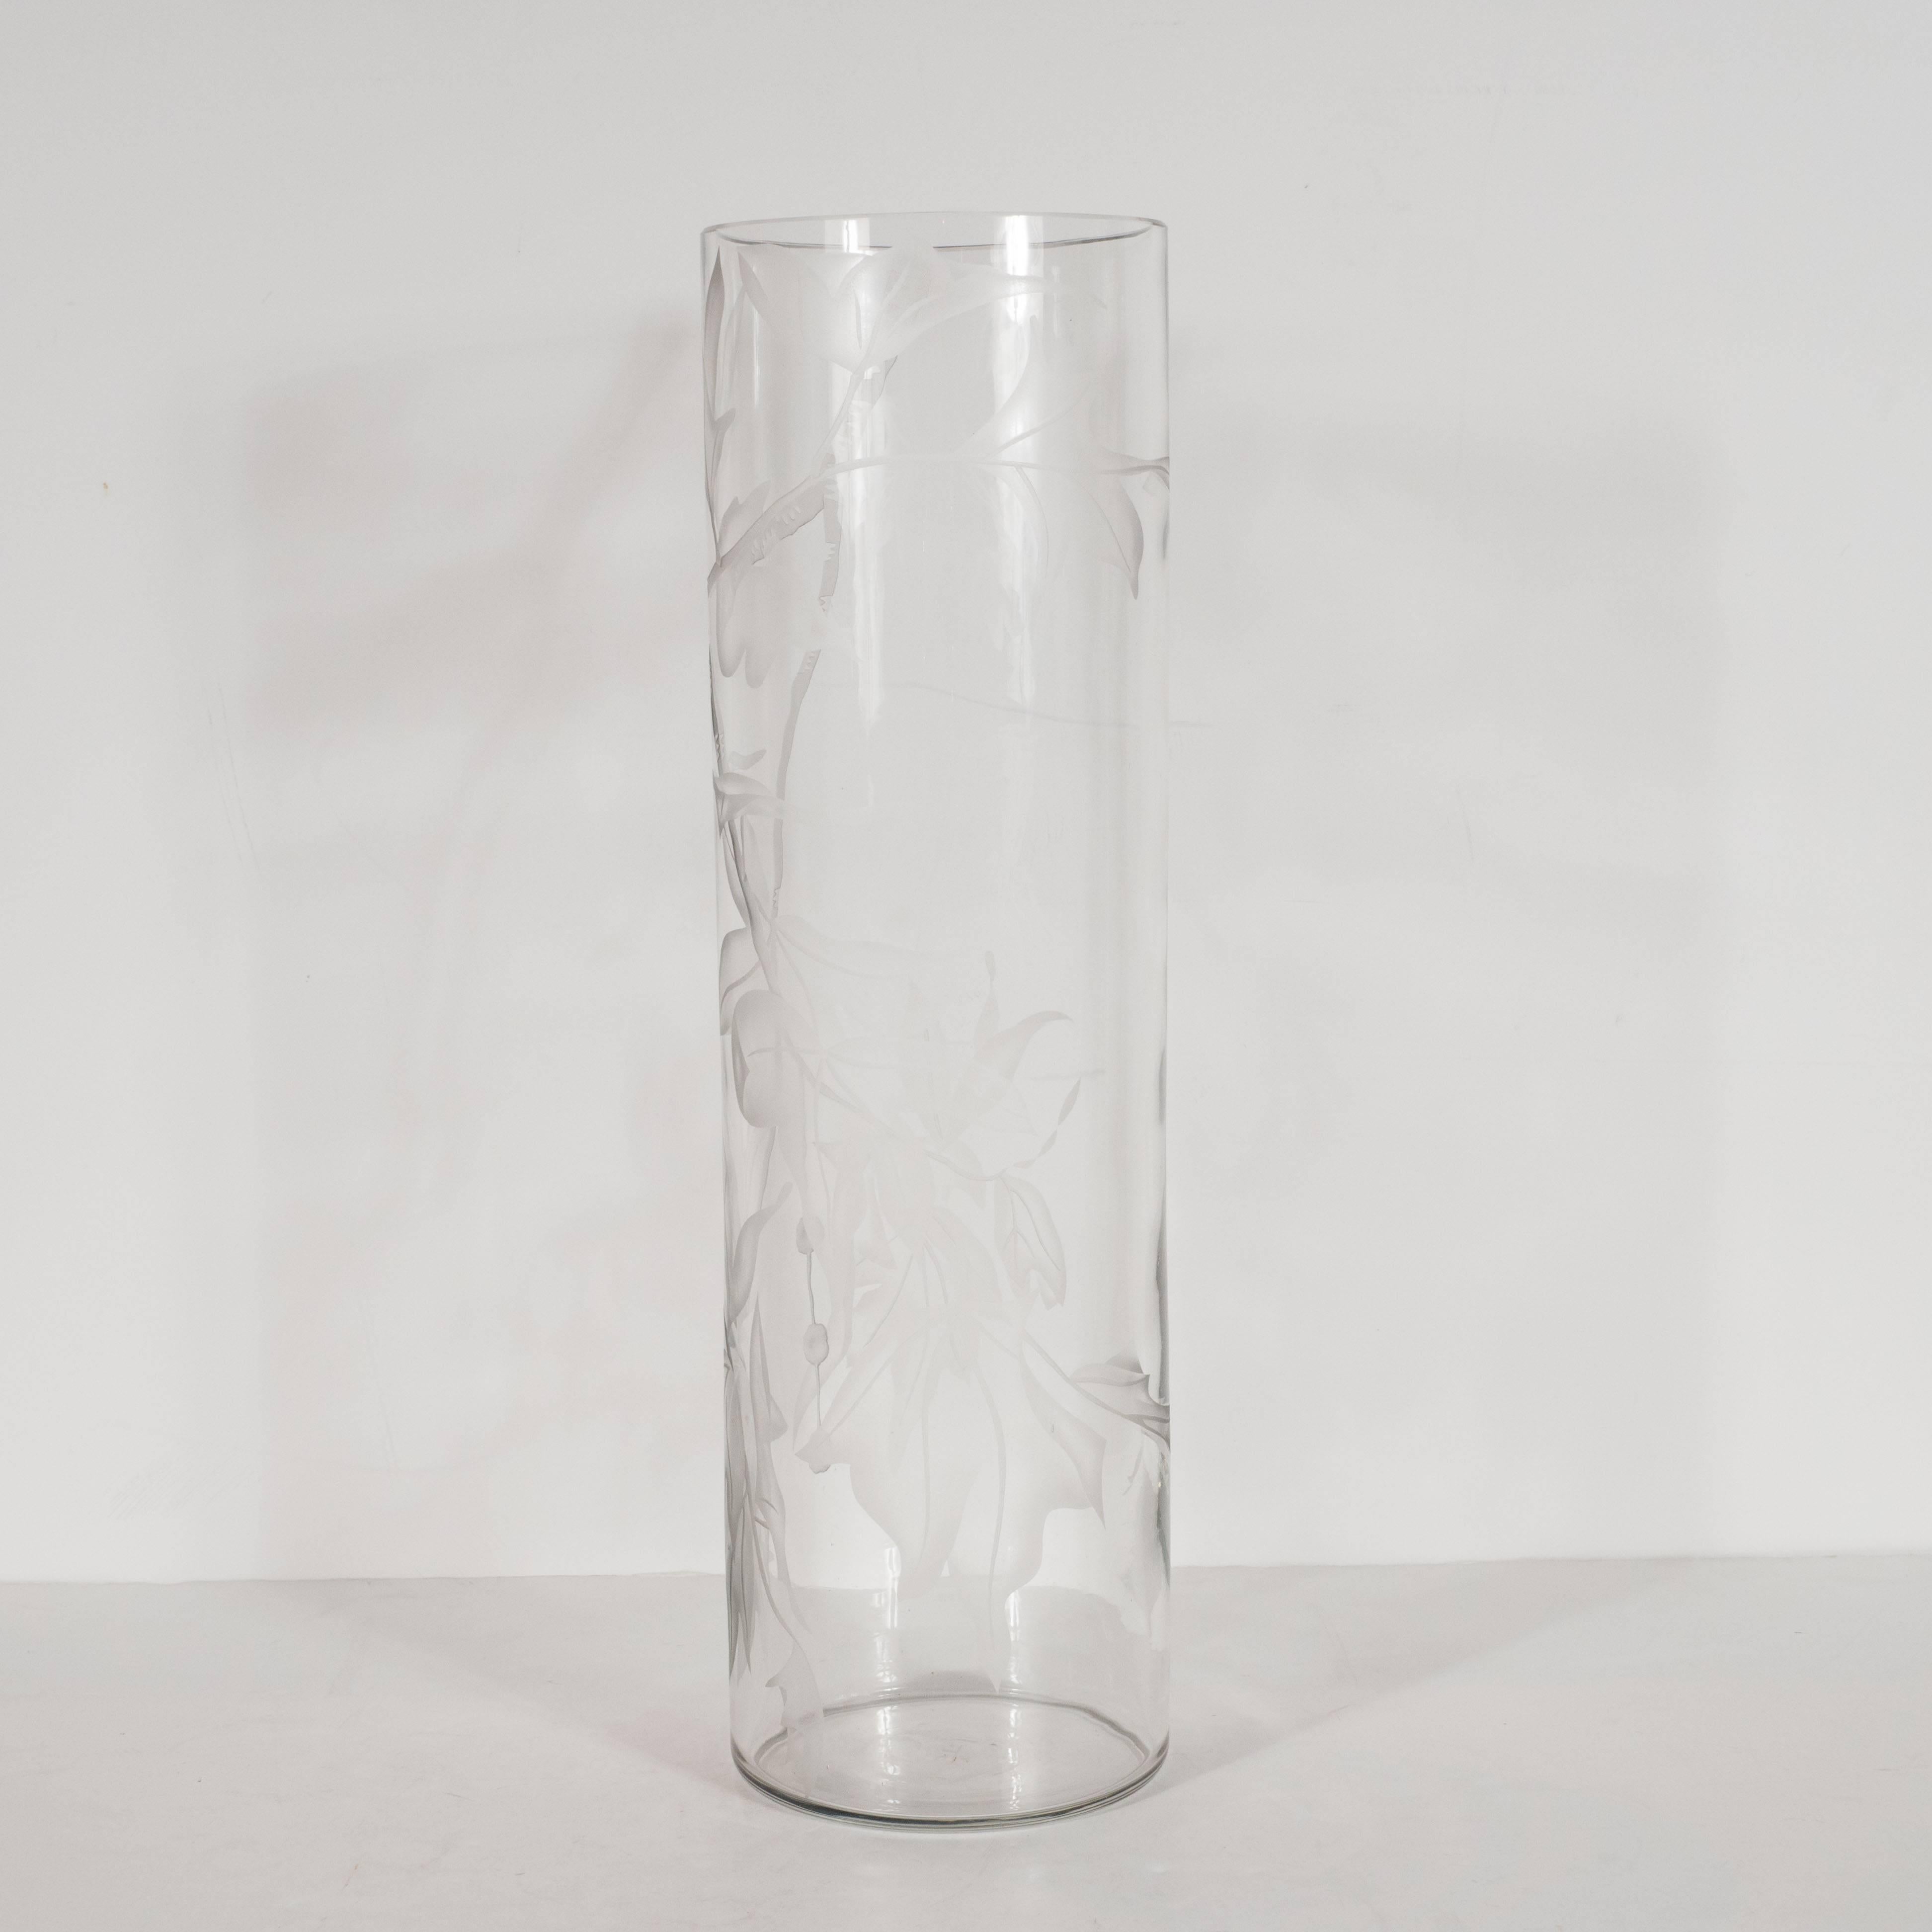 This sophisticated vase was created by Dorothy Thorpe, the acclaimed midcentury glassware designer, in the 1950s. Its understated elegance- consisting of an austere cylindrical form and acid etched maple leaf motif- helps to explain her renown.